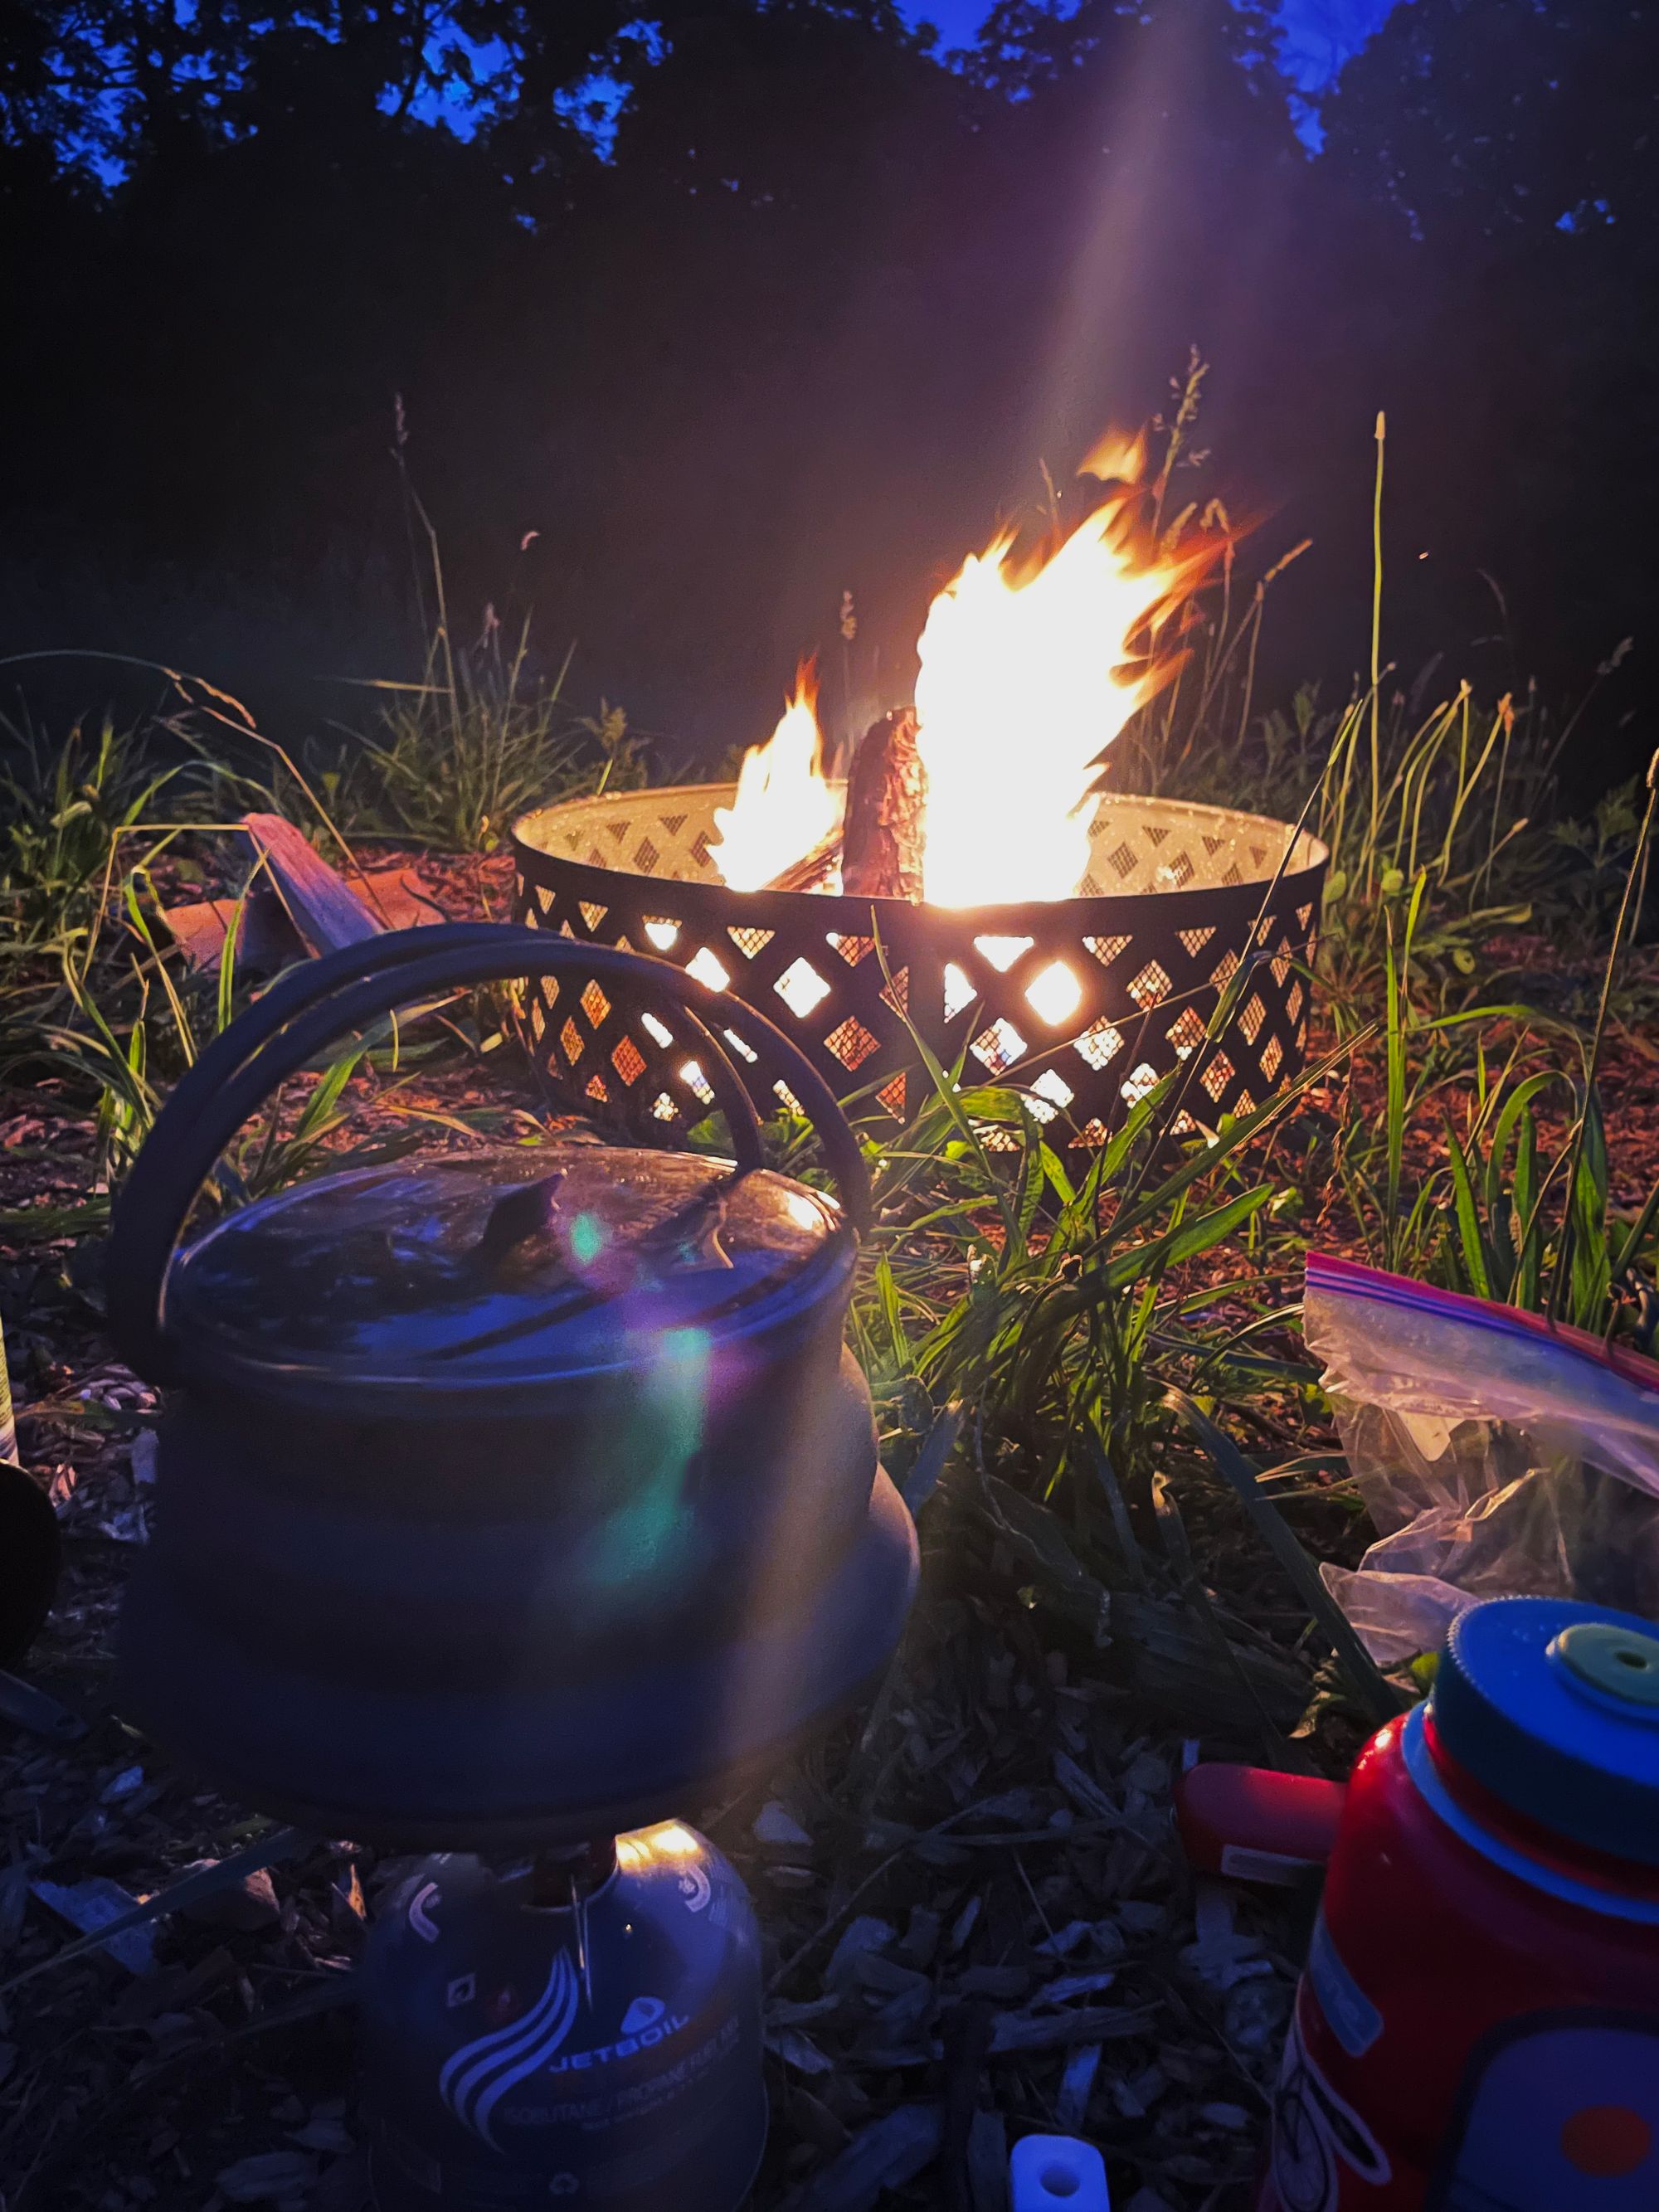 A collapsable kettle sits on a stove on the ground. A fire can be seen in the background.